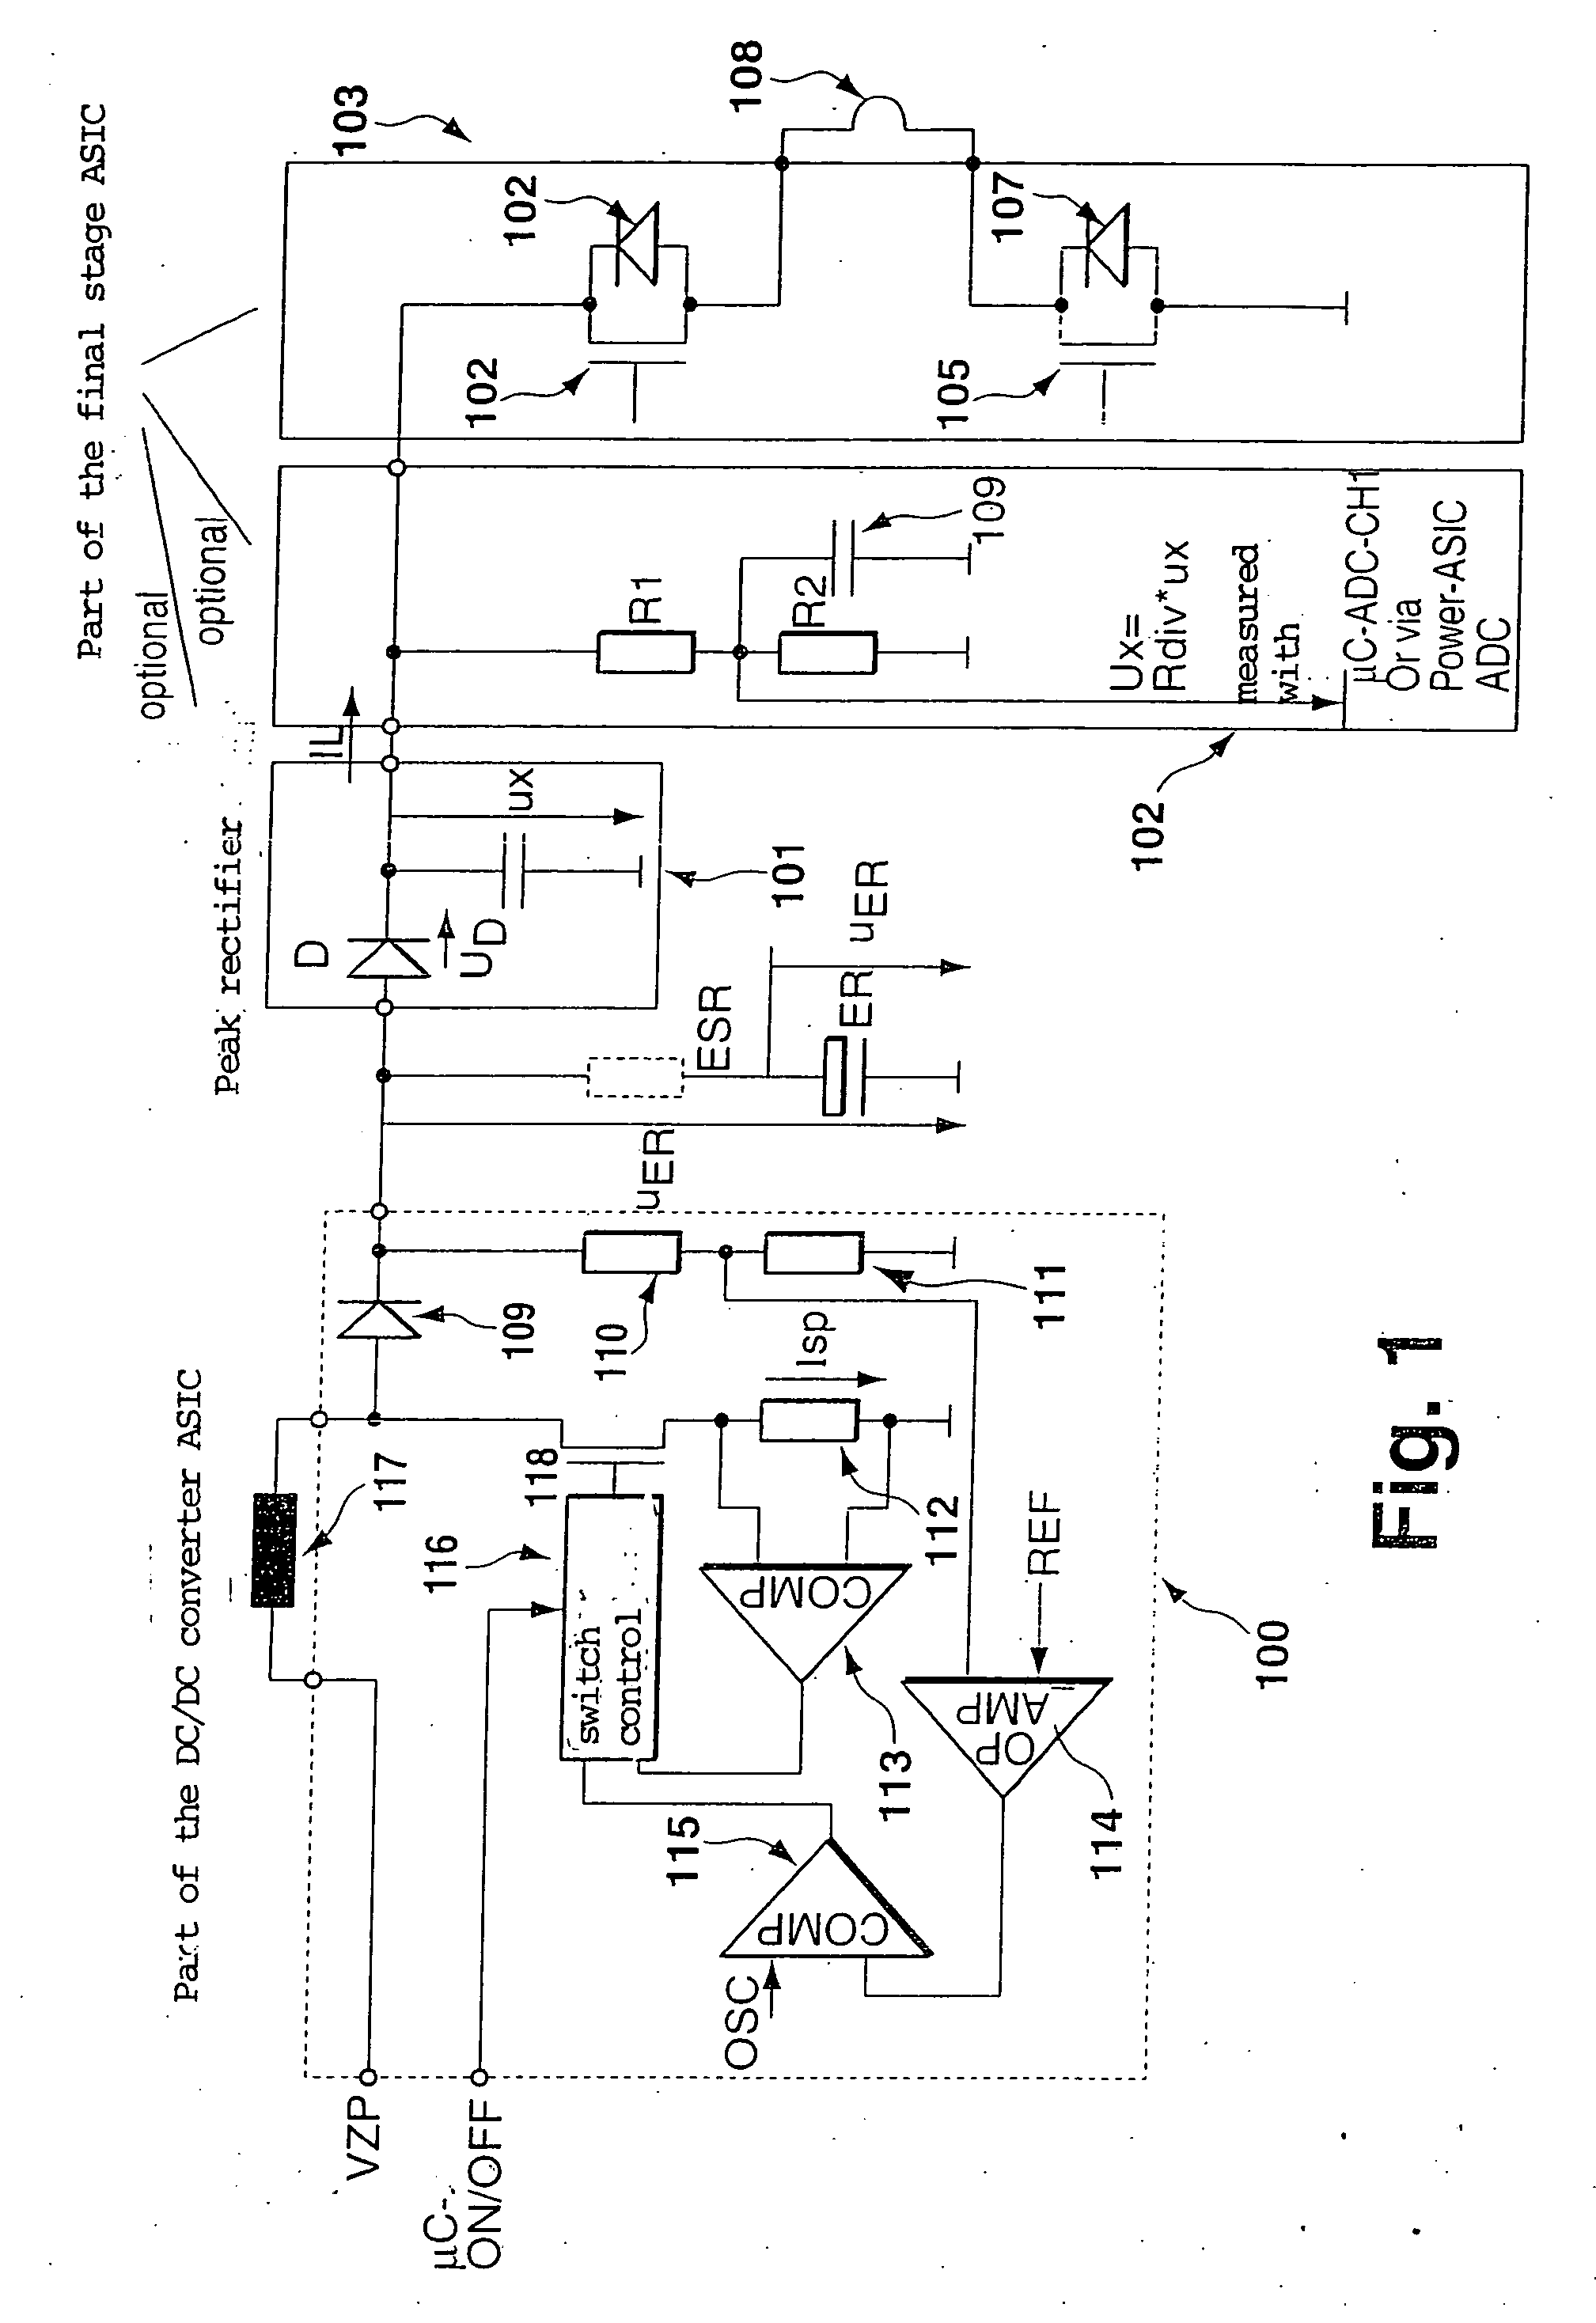 Device and method for monitoring at least one energy reserve capacitor in a restraint system